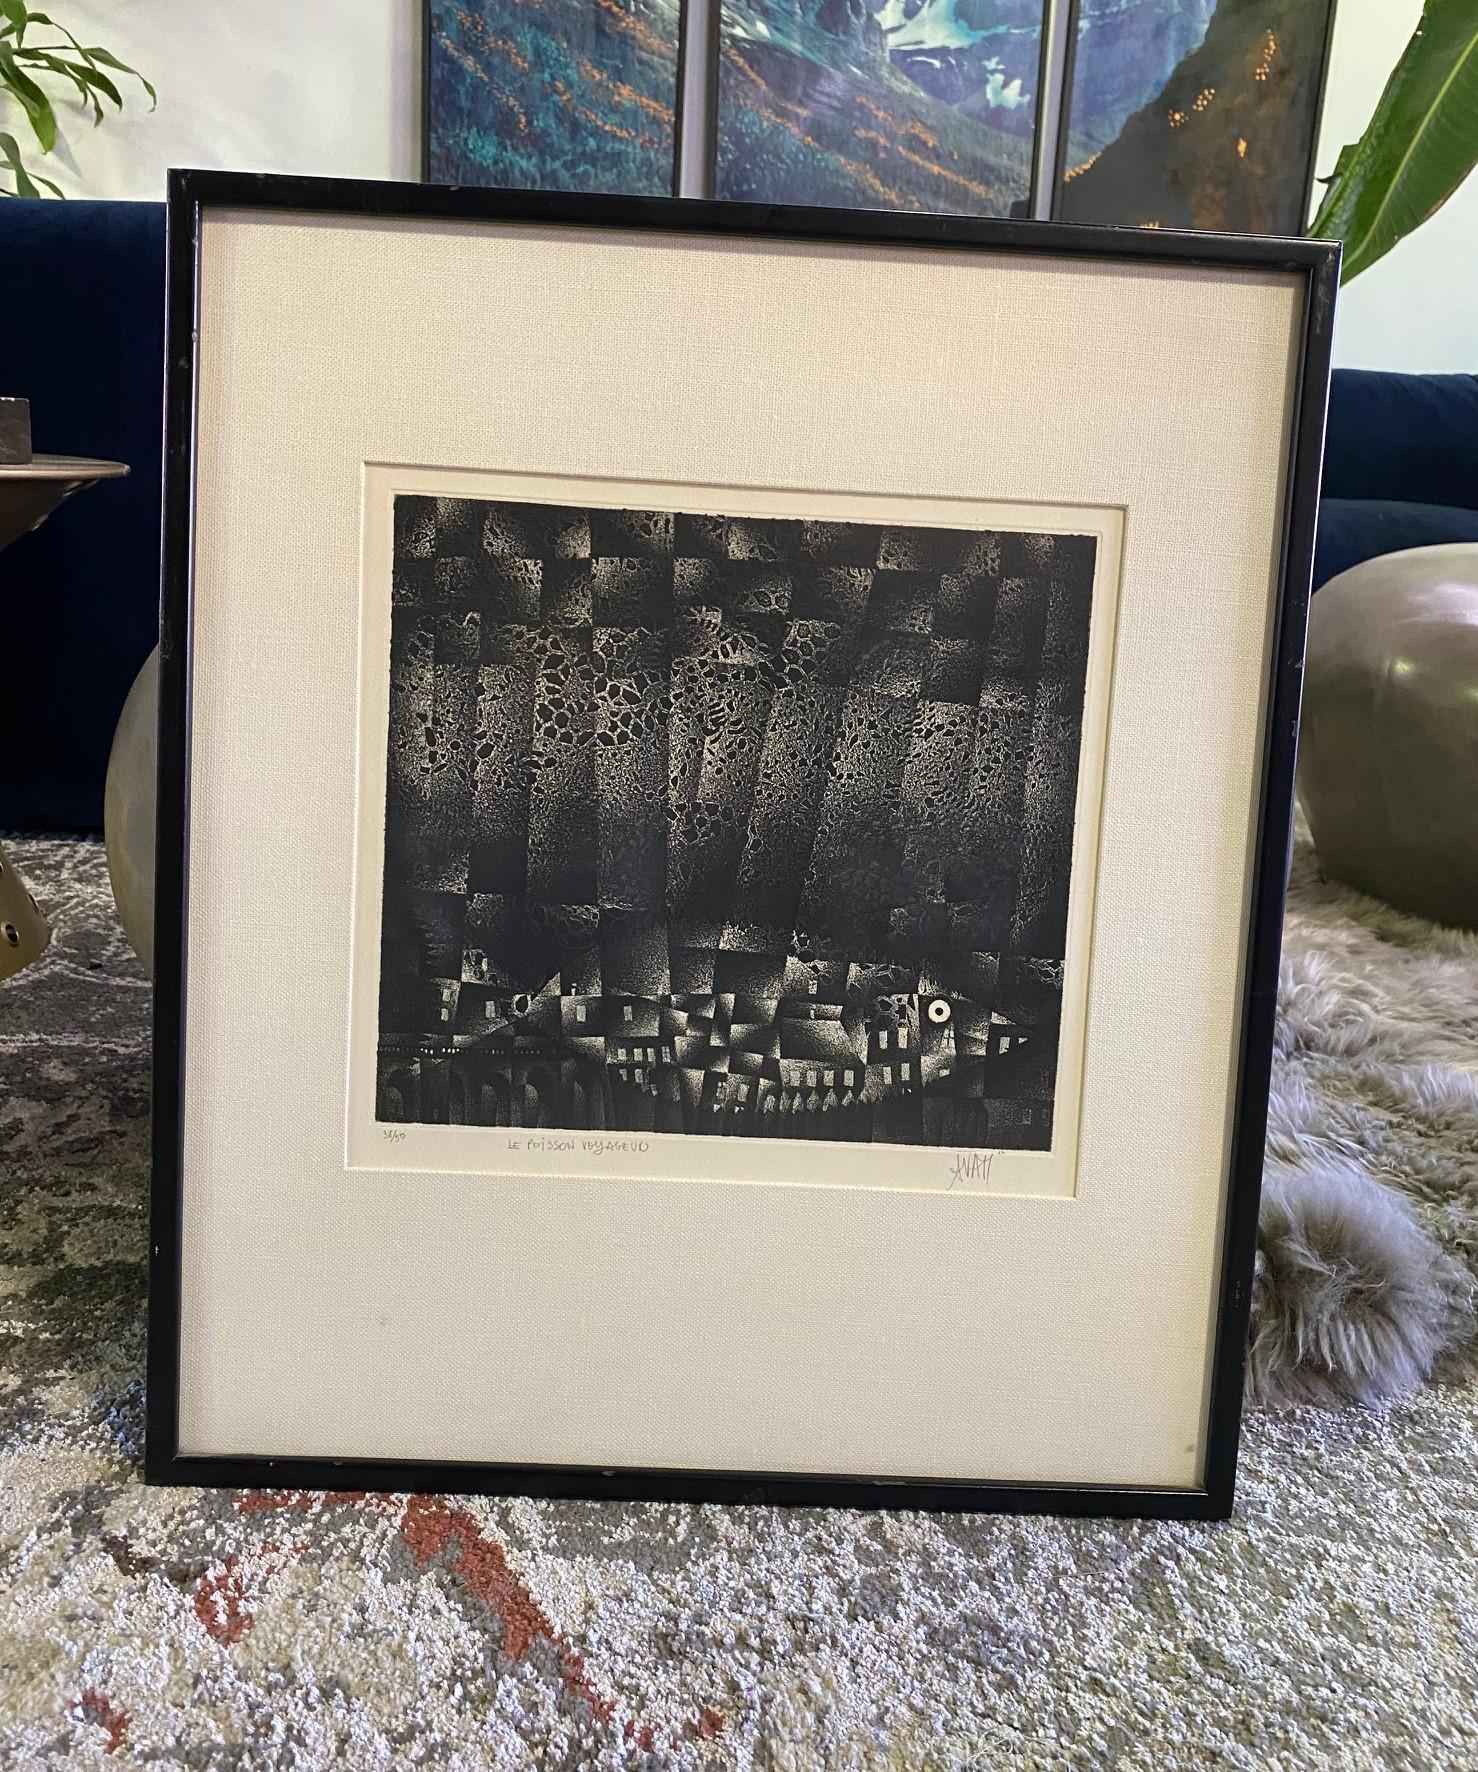 A wonderful black and white image and work by French/Monaco-born artist Mario Avati who was internationally regarded as a master of the mezzotint printing technique. 

The print is hand pencil signed, numbered (38/50), and titled 